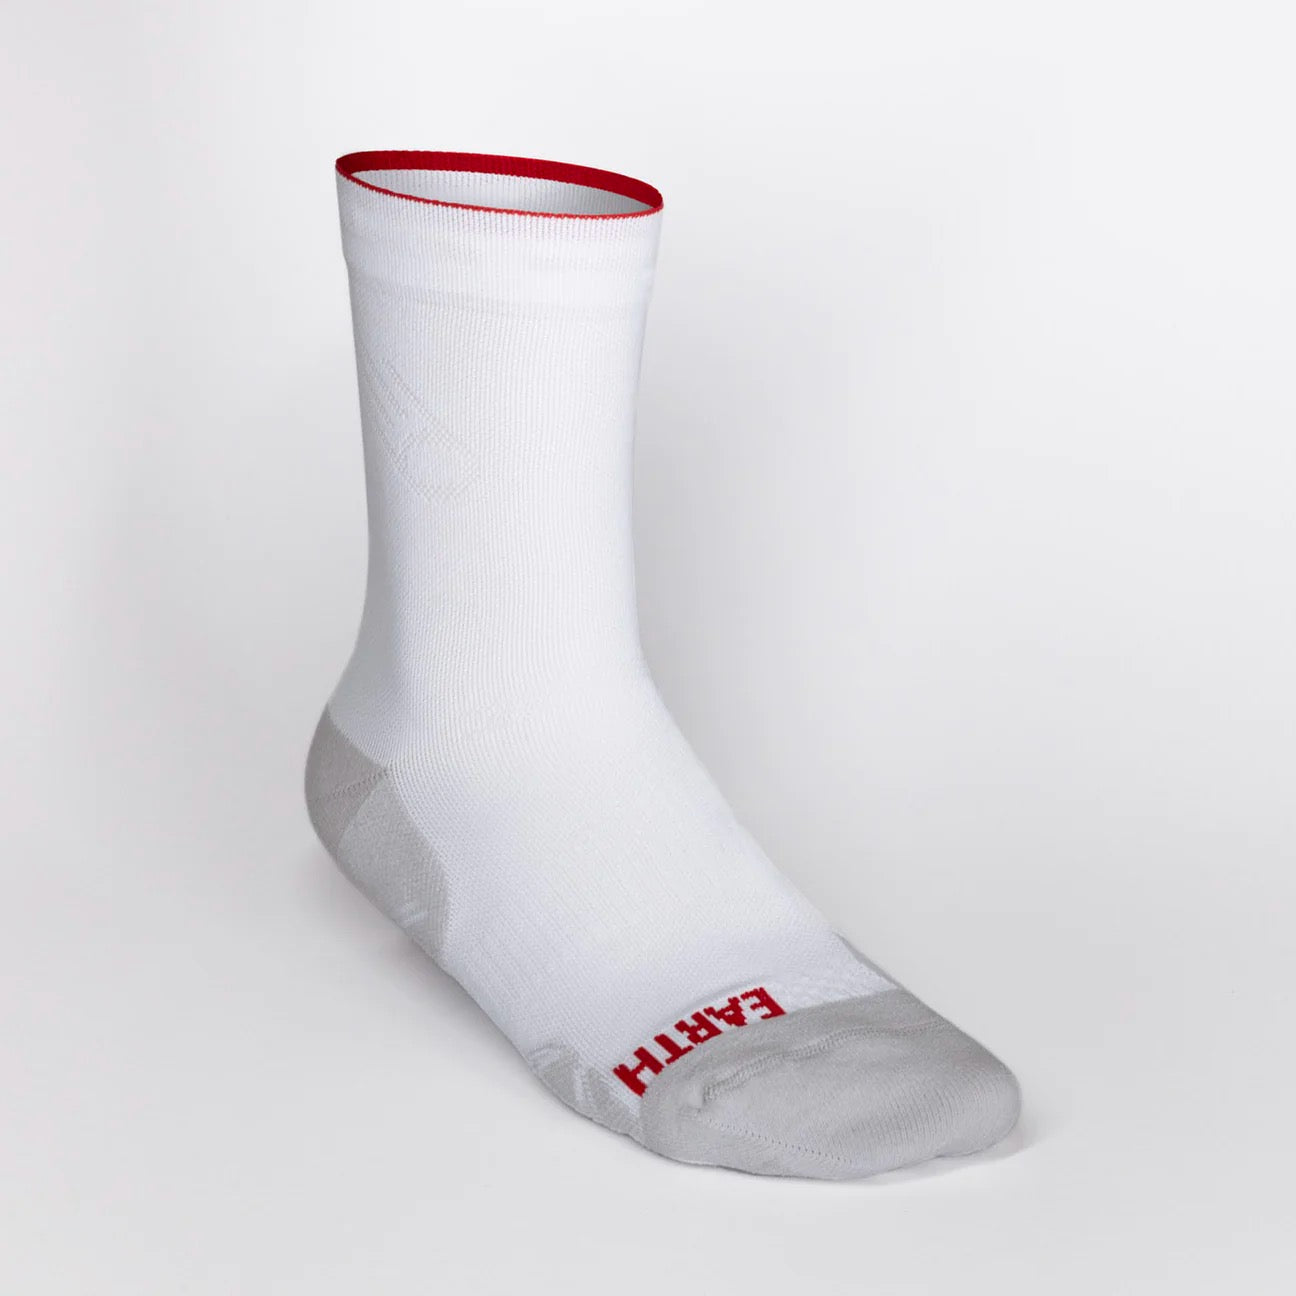 Near Earth x Renegade The Distance Running Sock (White)